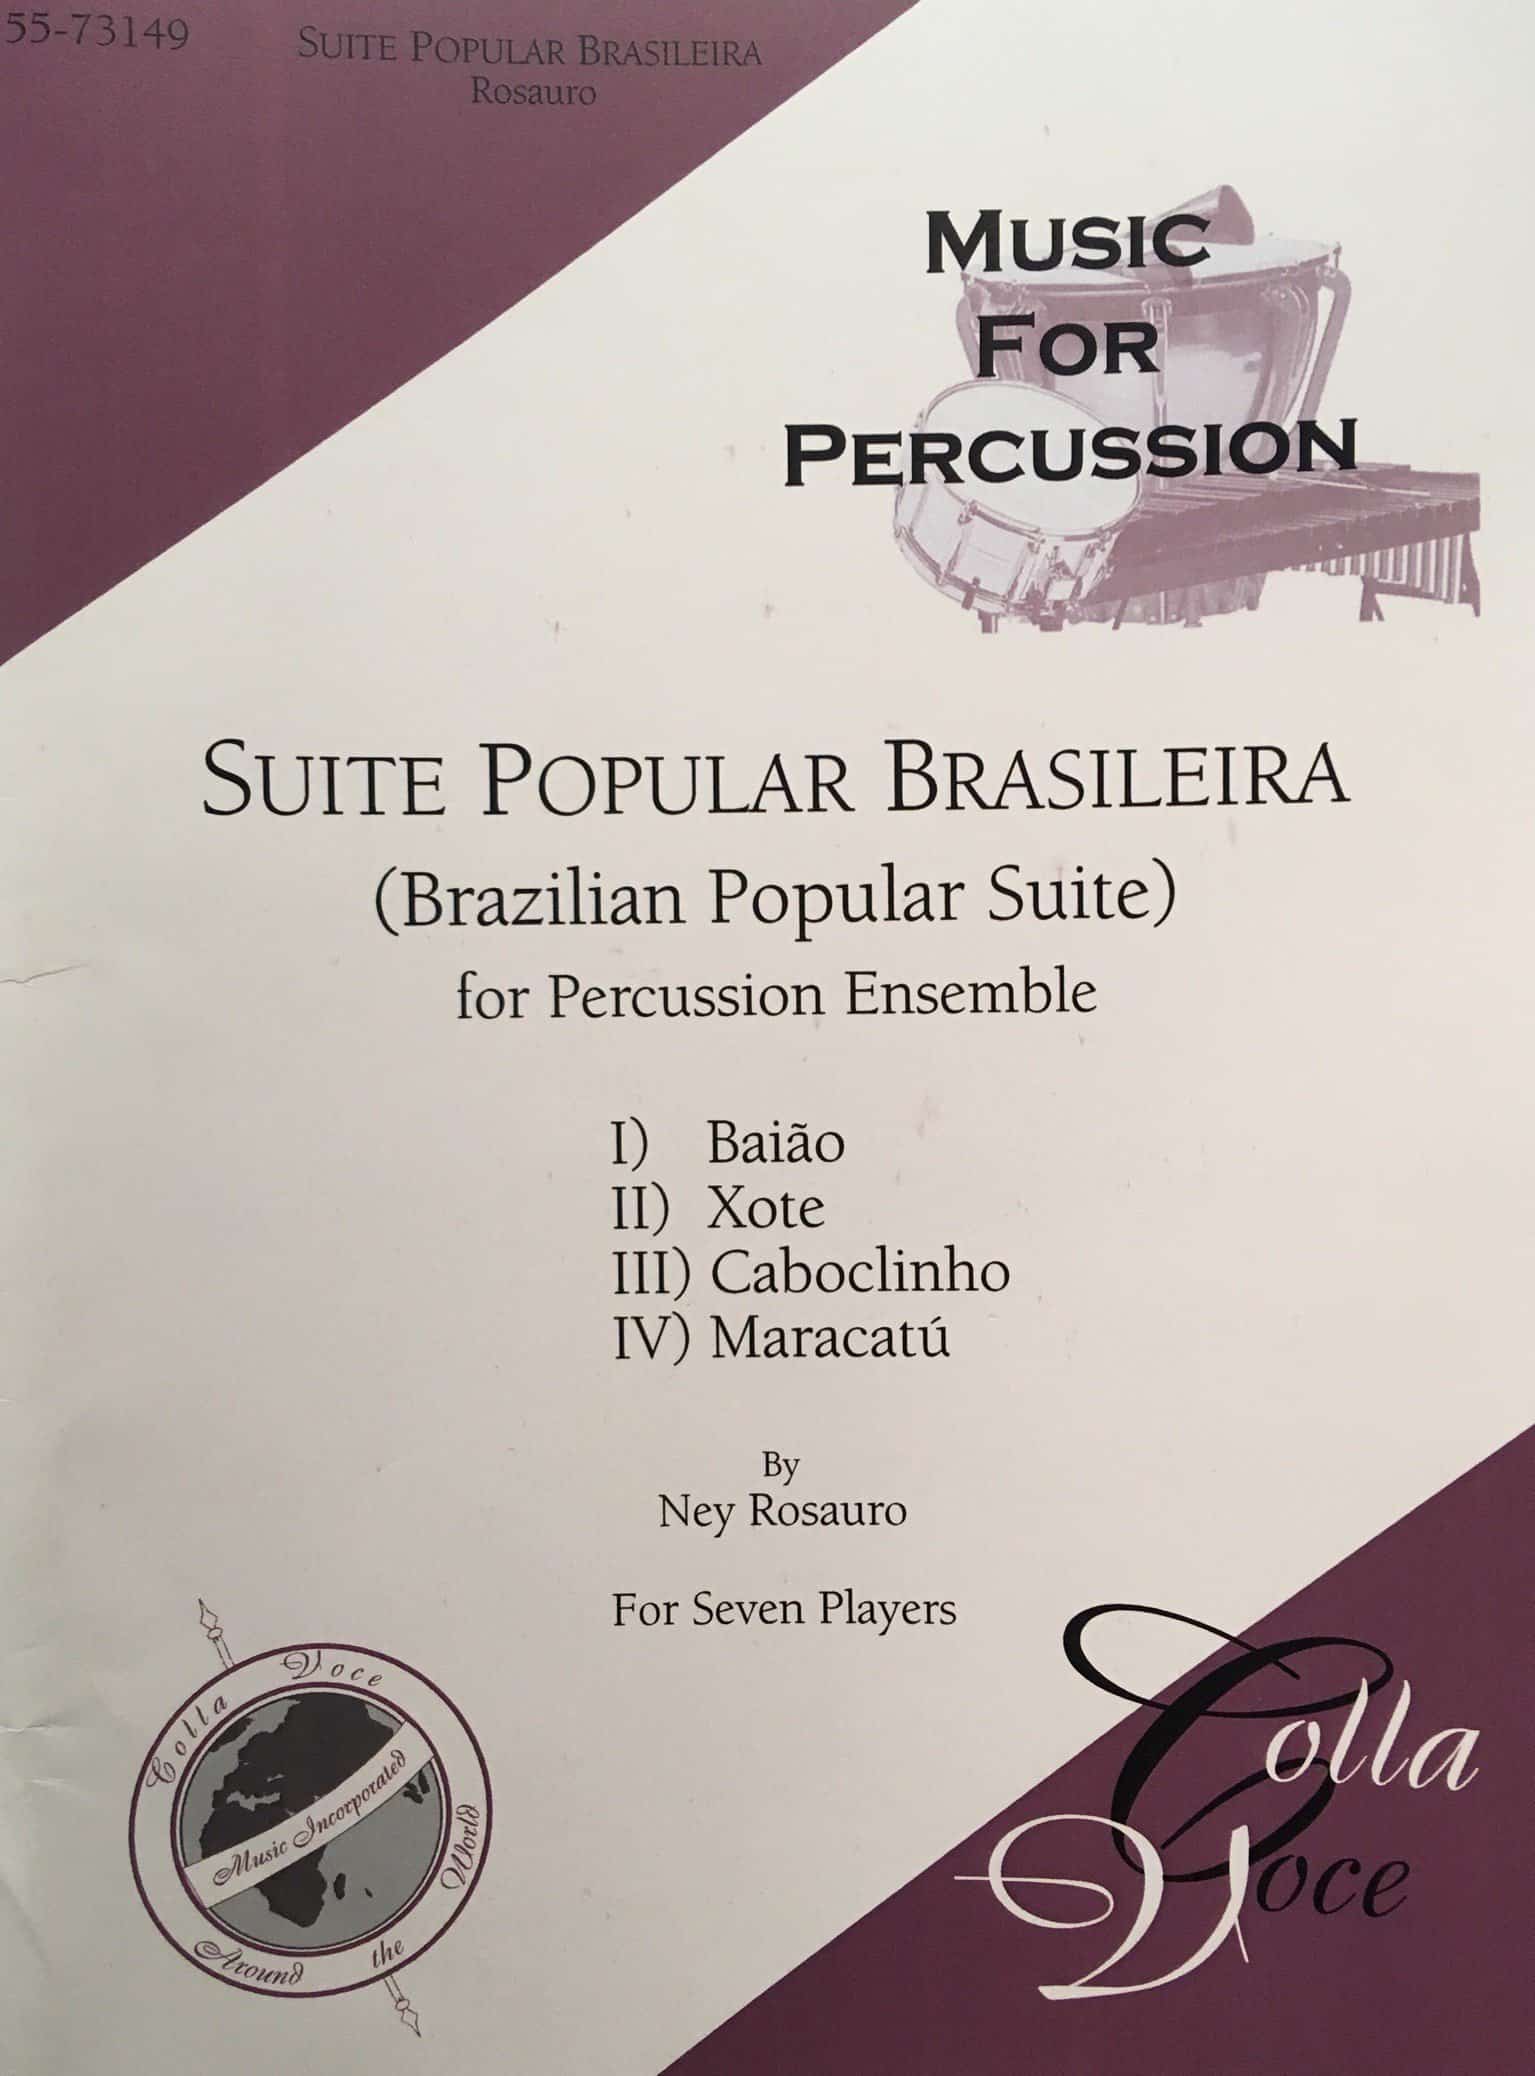 Suite Popular Brasileira for percussion ensemble by Ney Rosauro